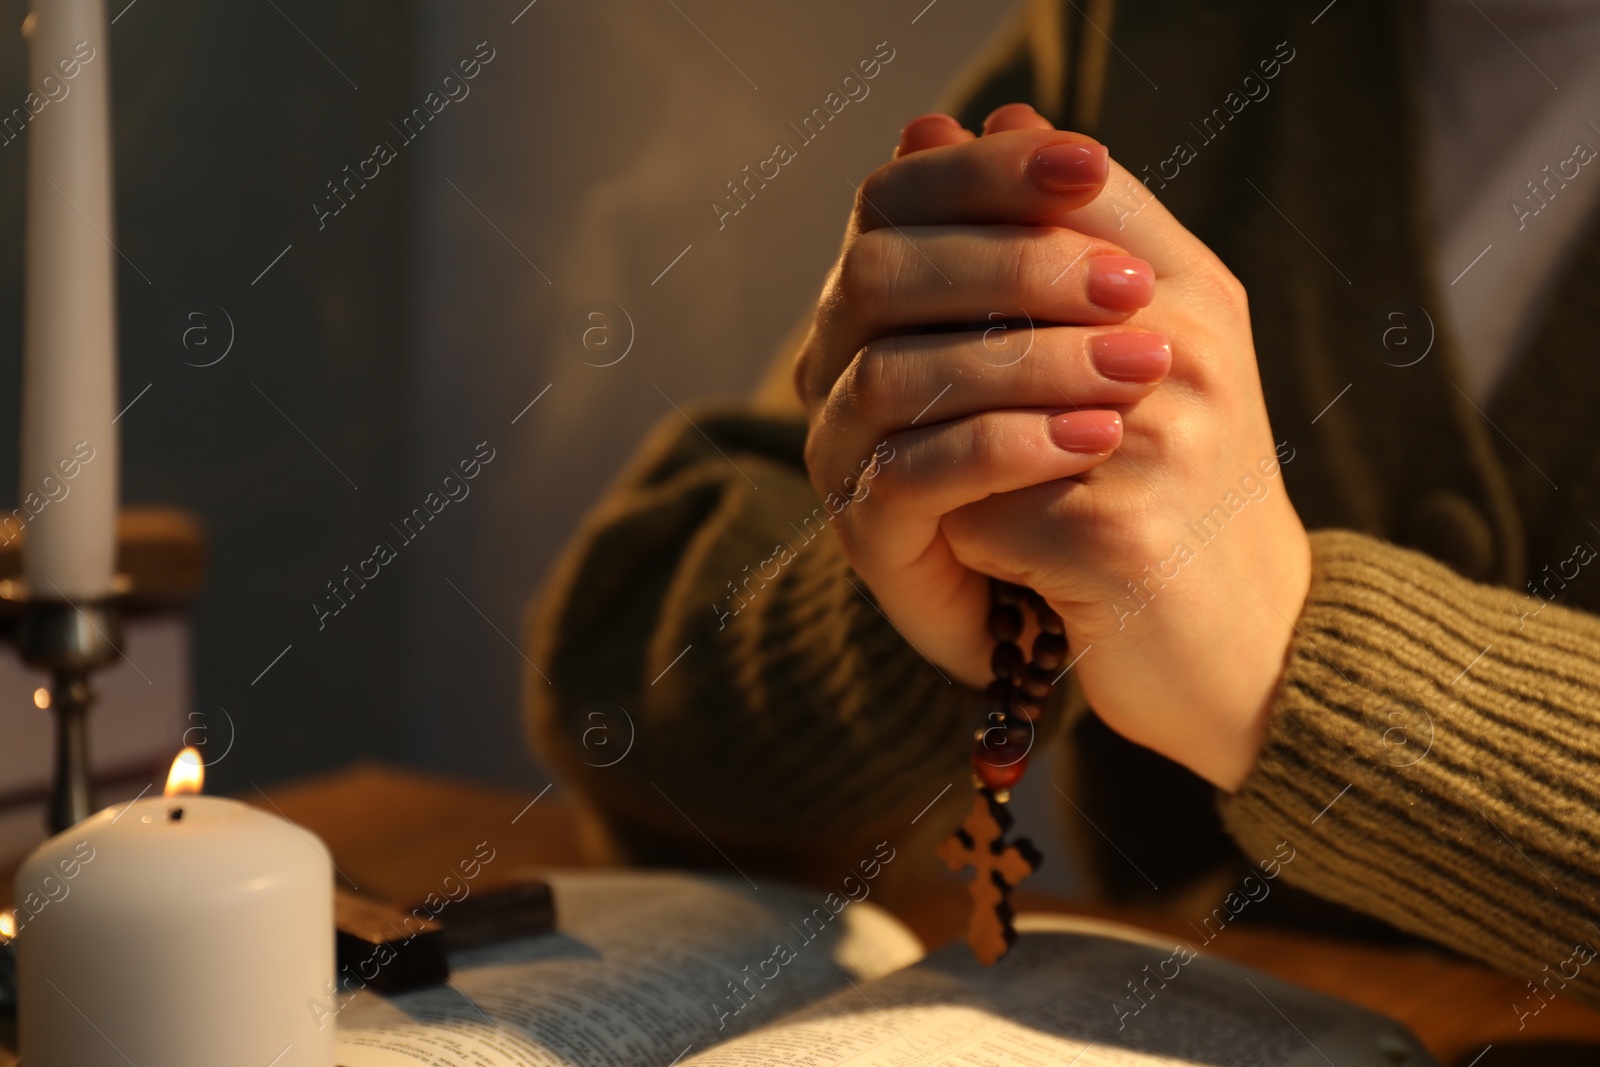 Photo of Woman praying at table with burning candle and Bible, closeup